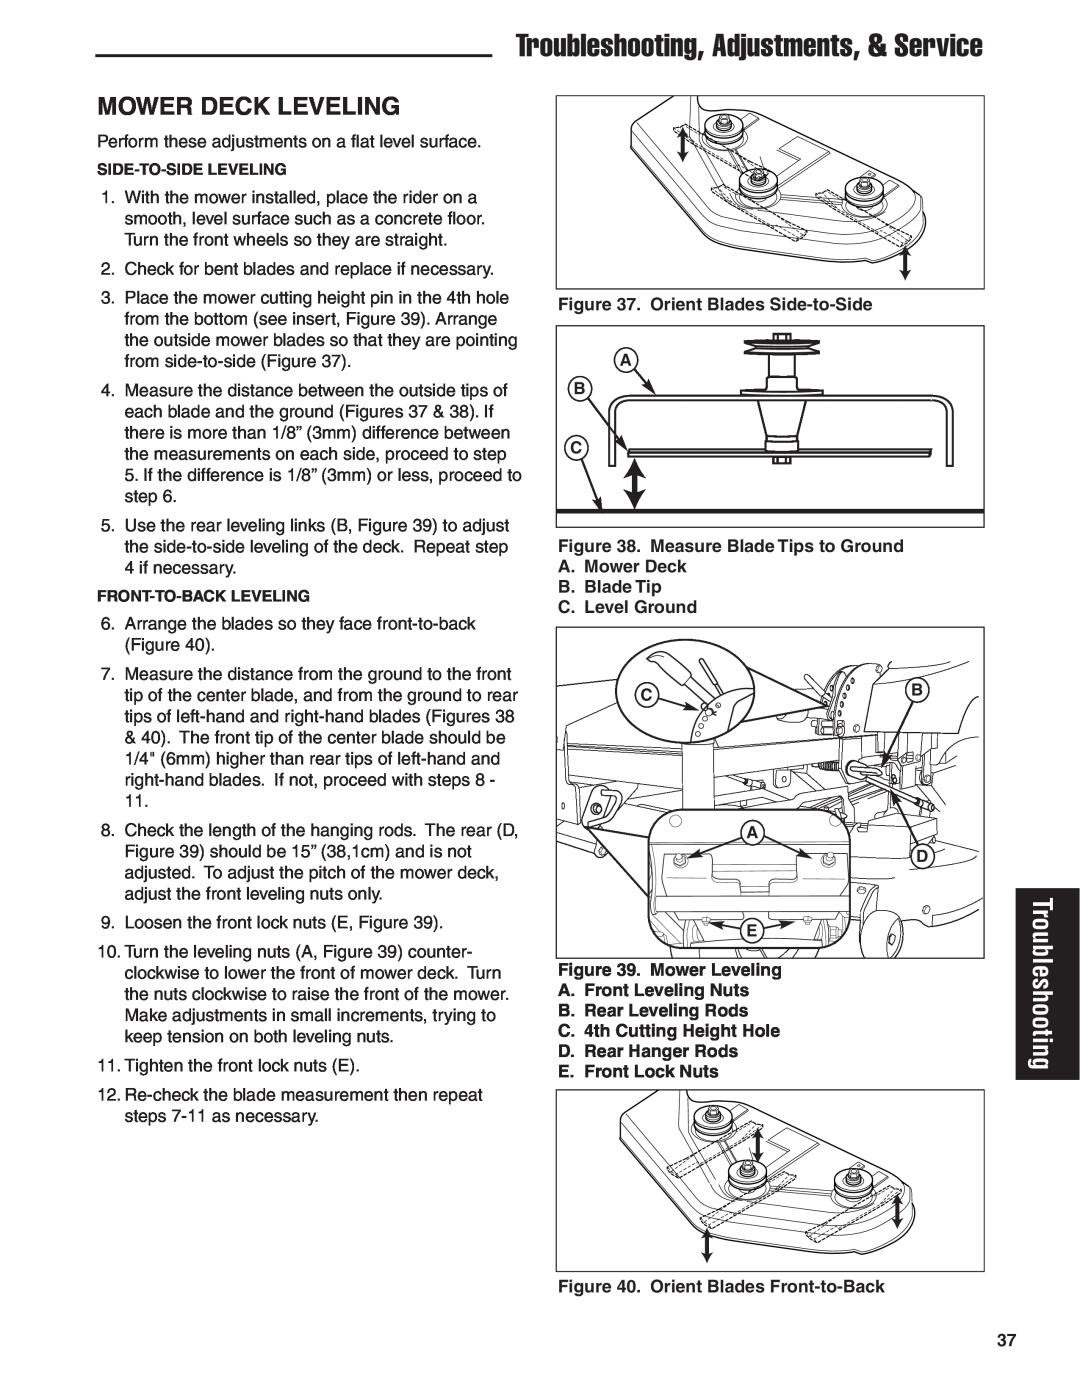 Simplicity 24HP manual Mower Deck Leveling, Troubleshooting, Adjustments, & Service 